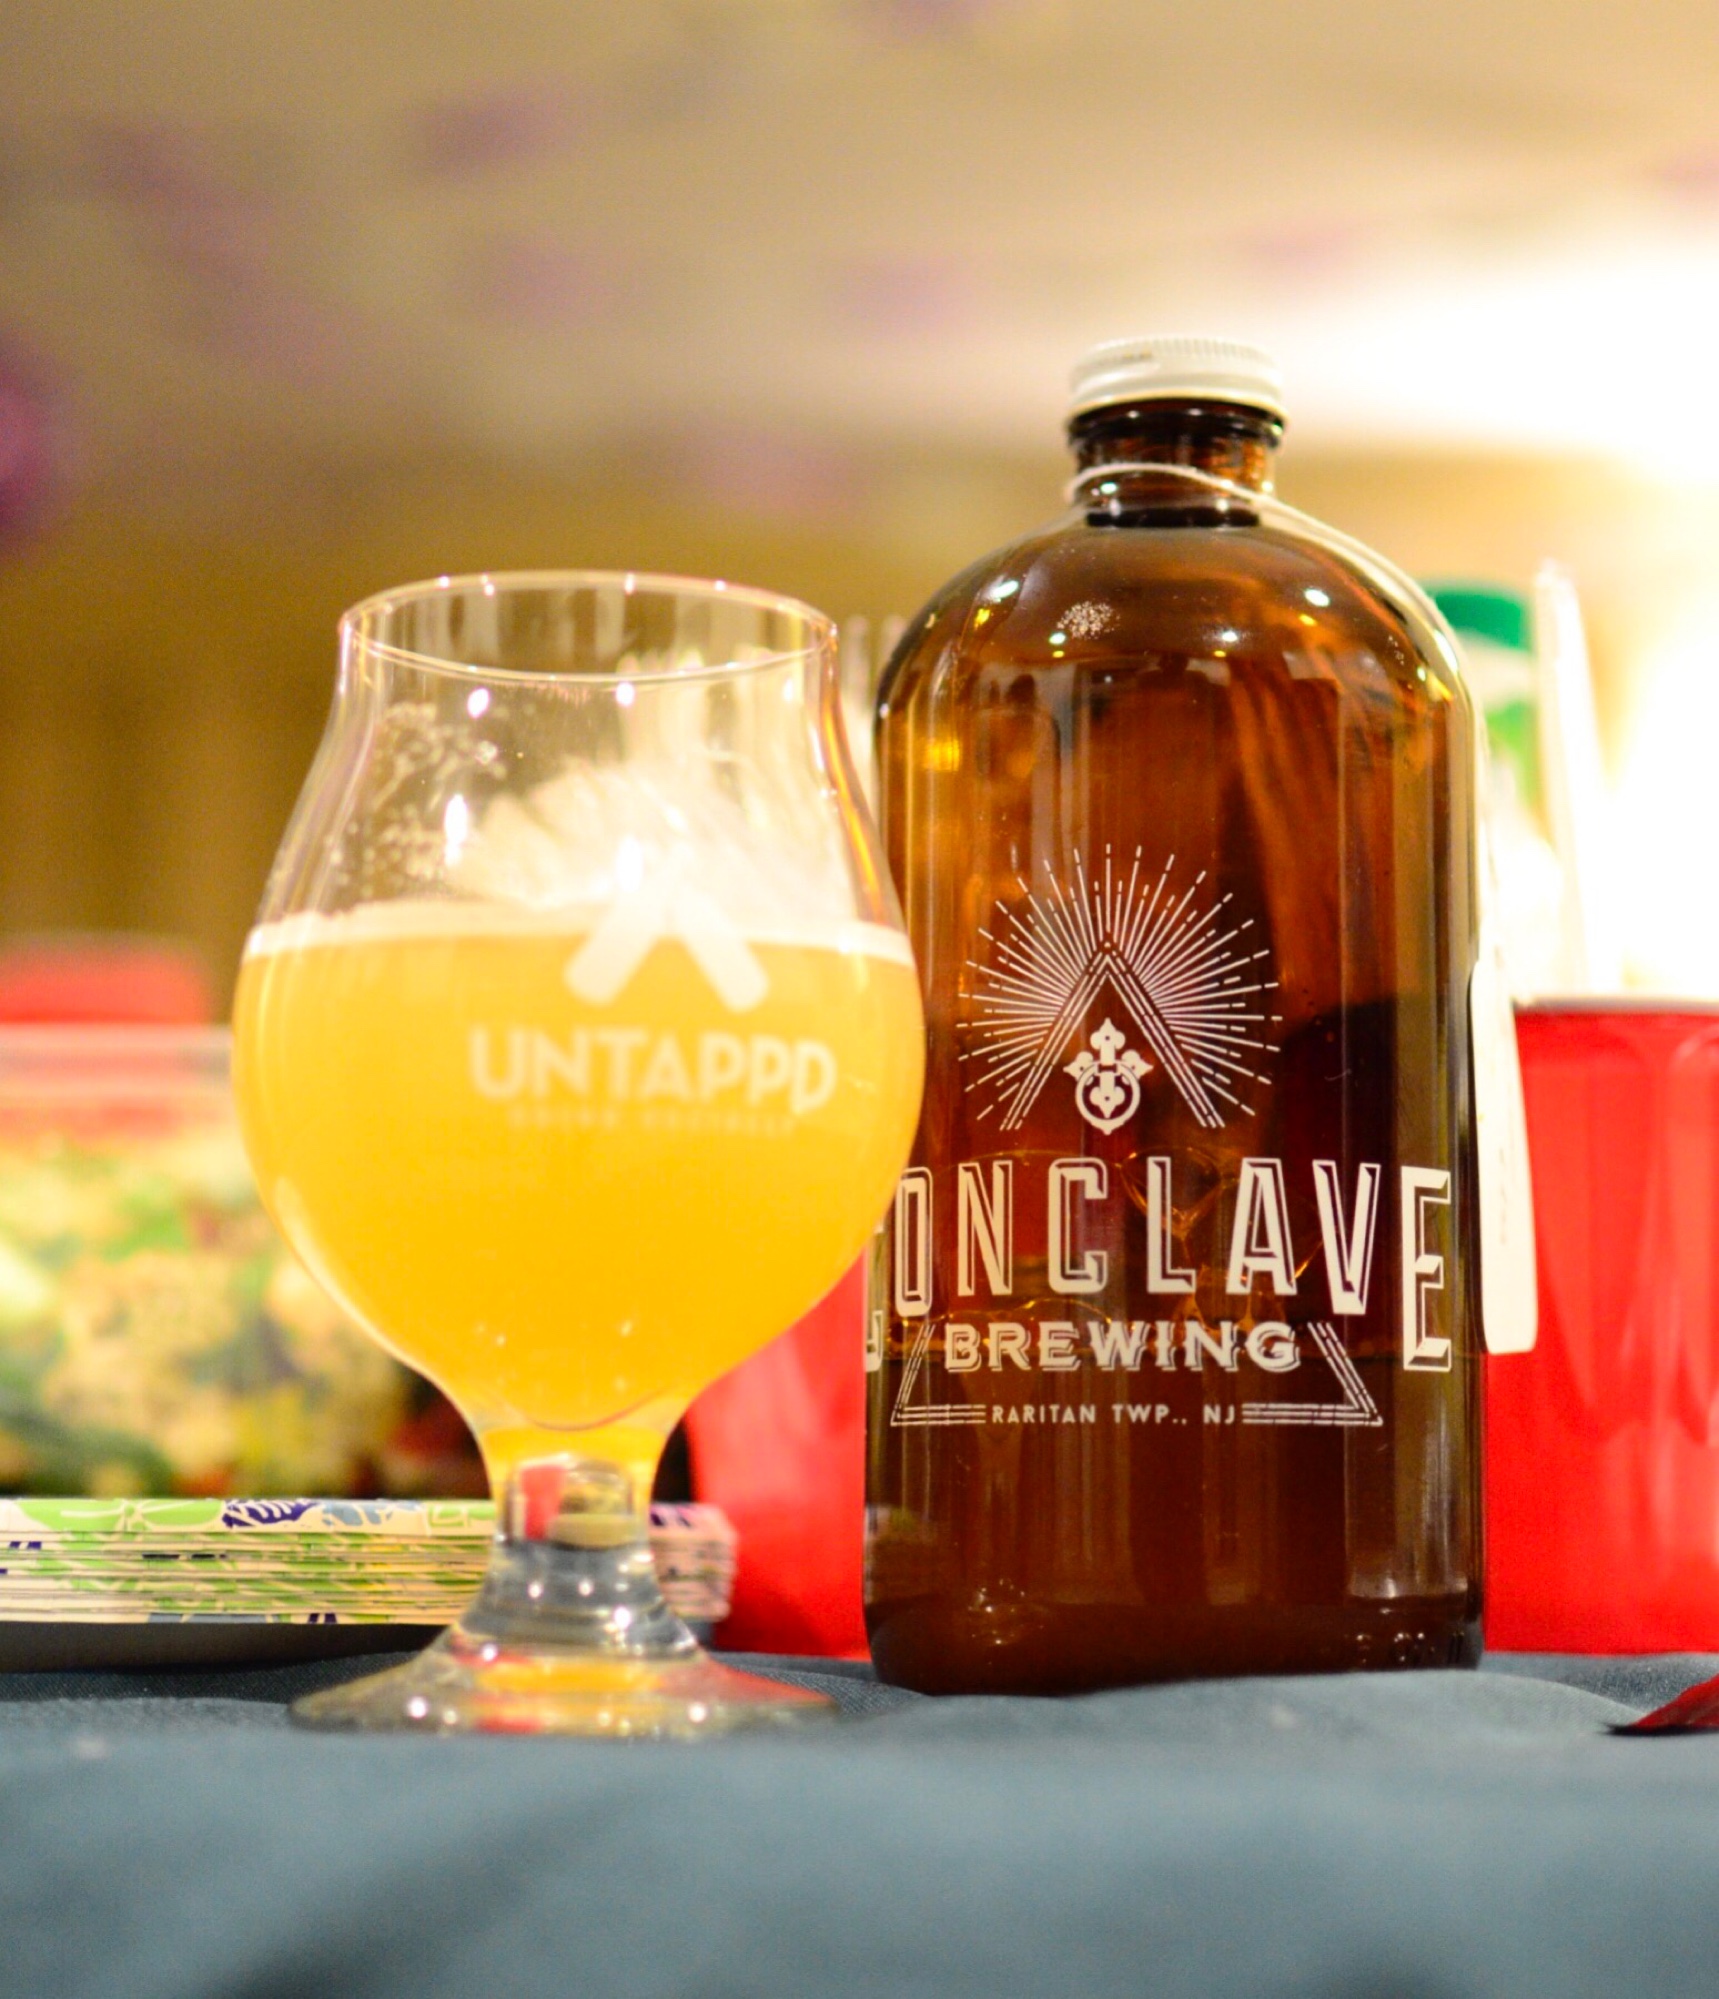 Conclave Brewing's Backspin